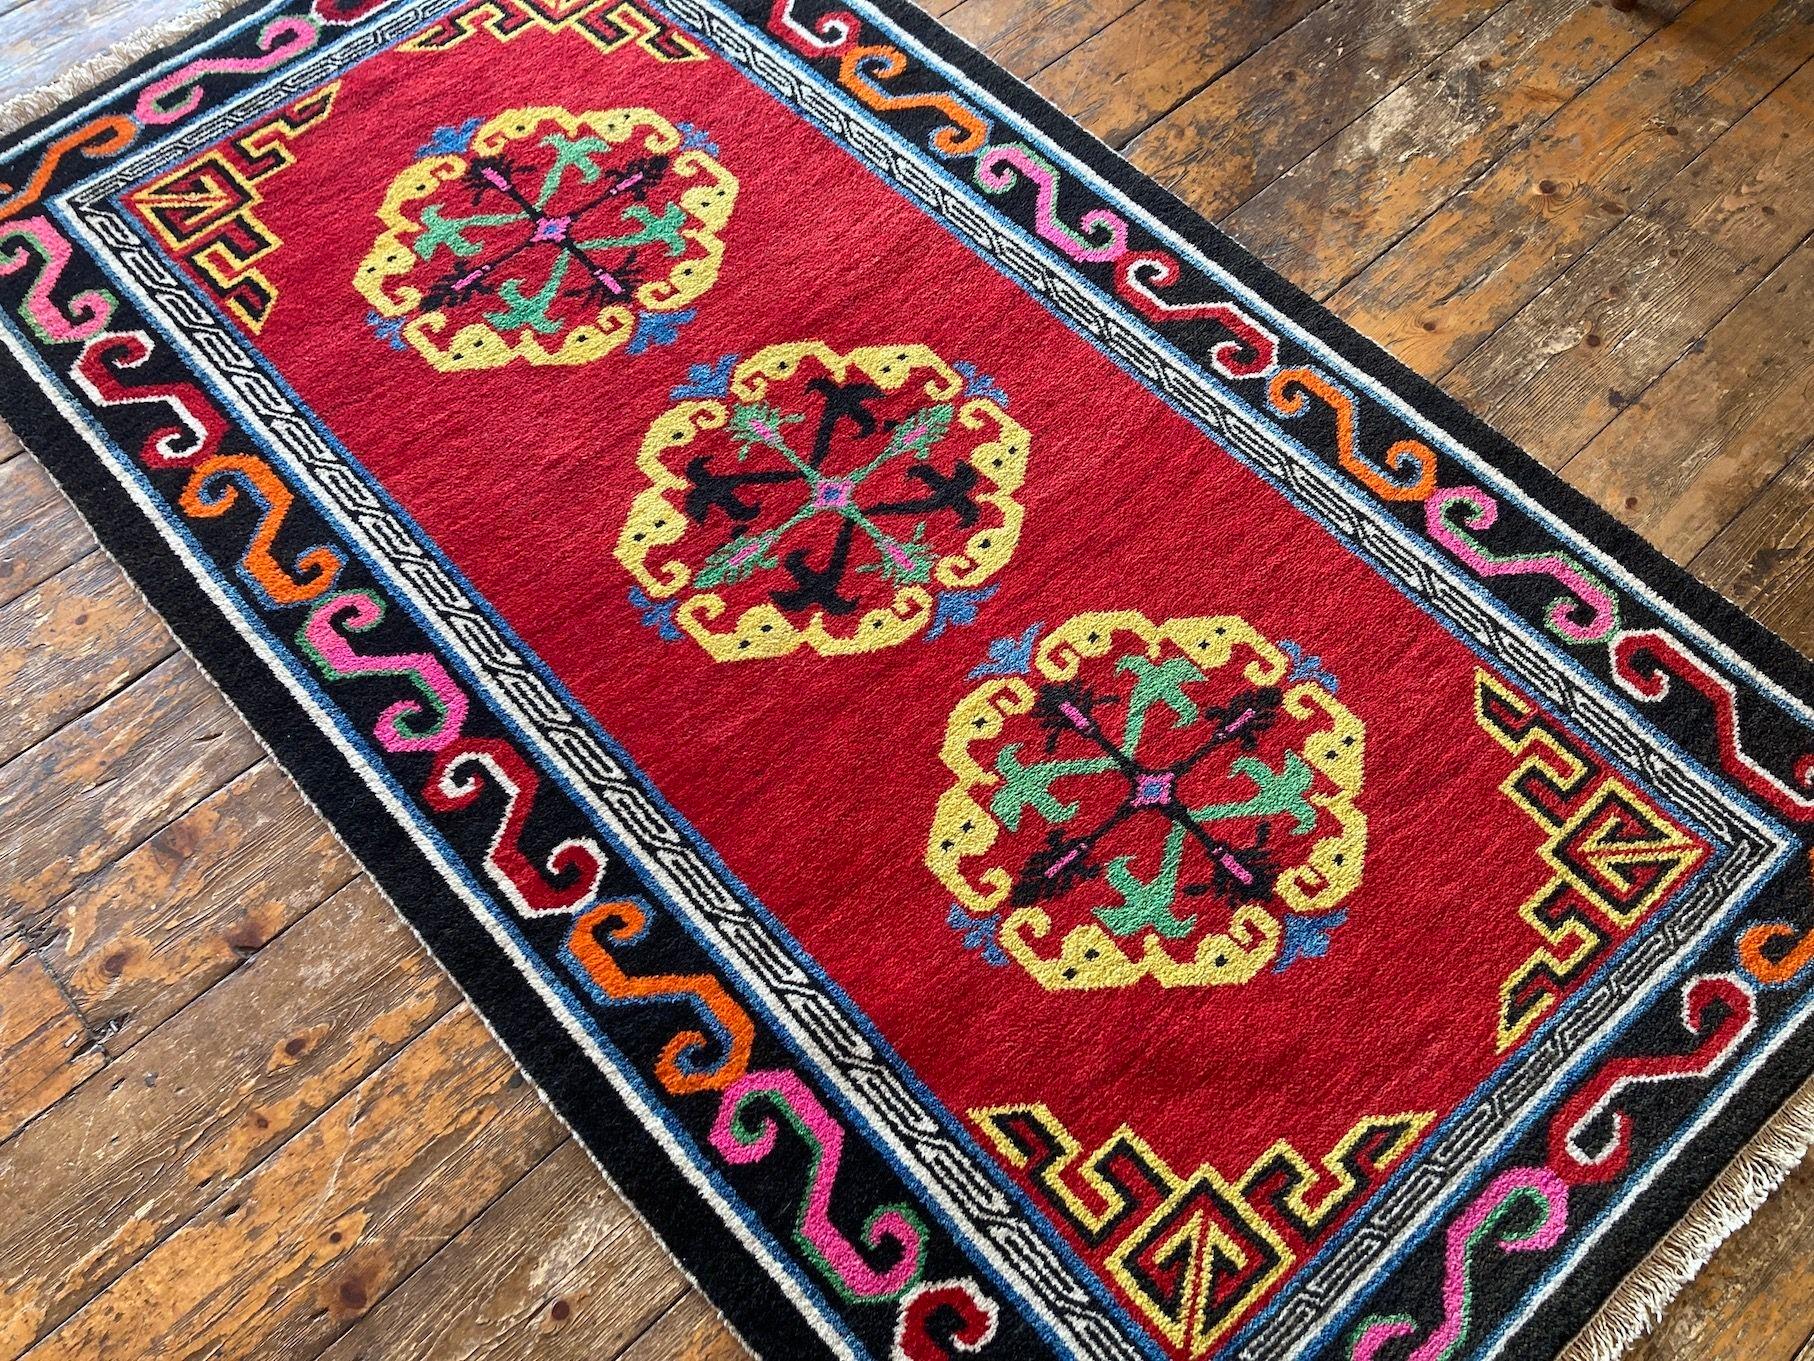 Early 20th Century Antique Tibetan Rug 1.70m X 0.97m For Sale